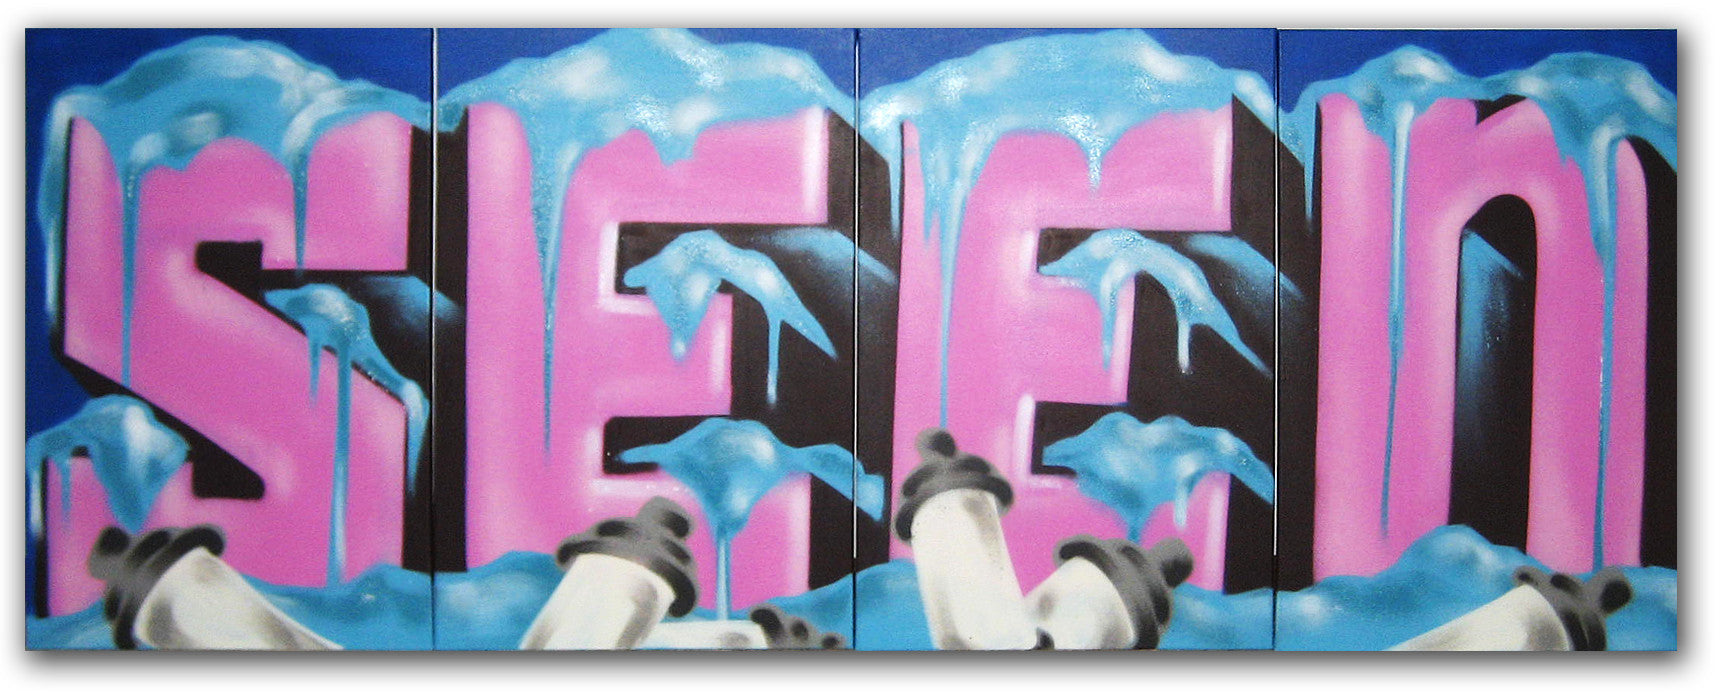 GRAFFITI ARTIST SEEN -  Frosted - Quadtych Painting